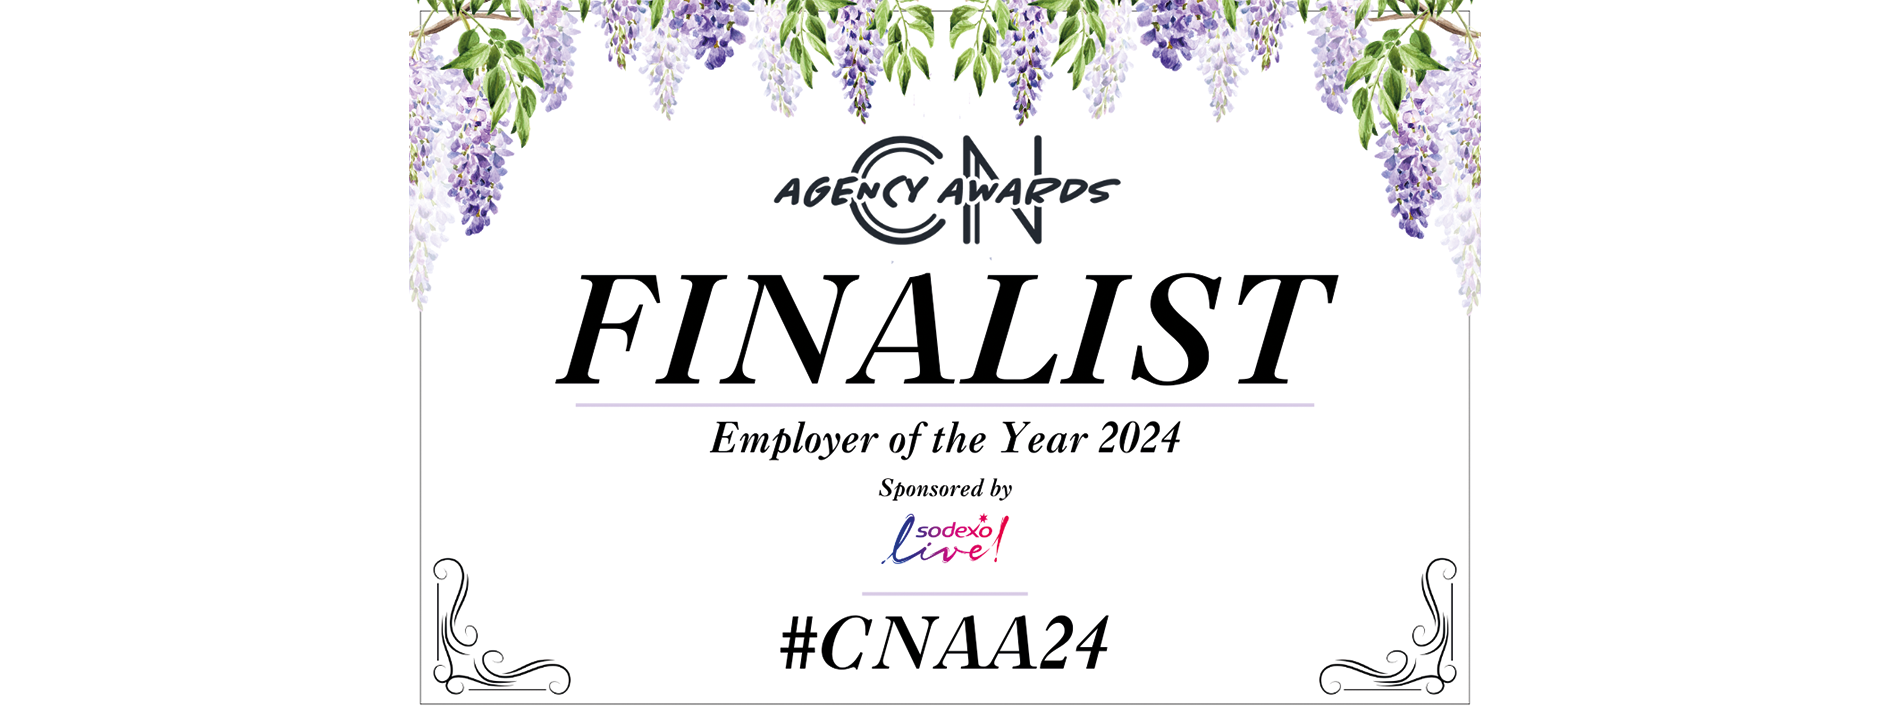 Conference News Awards 2024 Employer of the Year Finalists ZiaBia